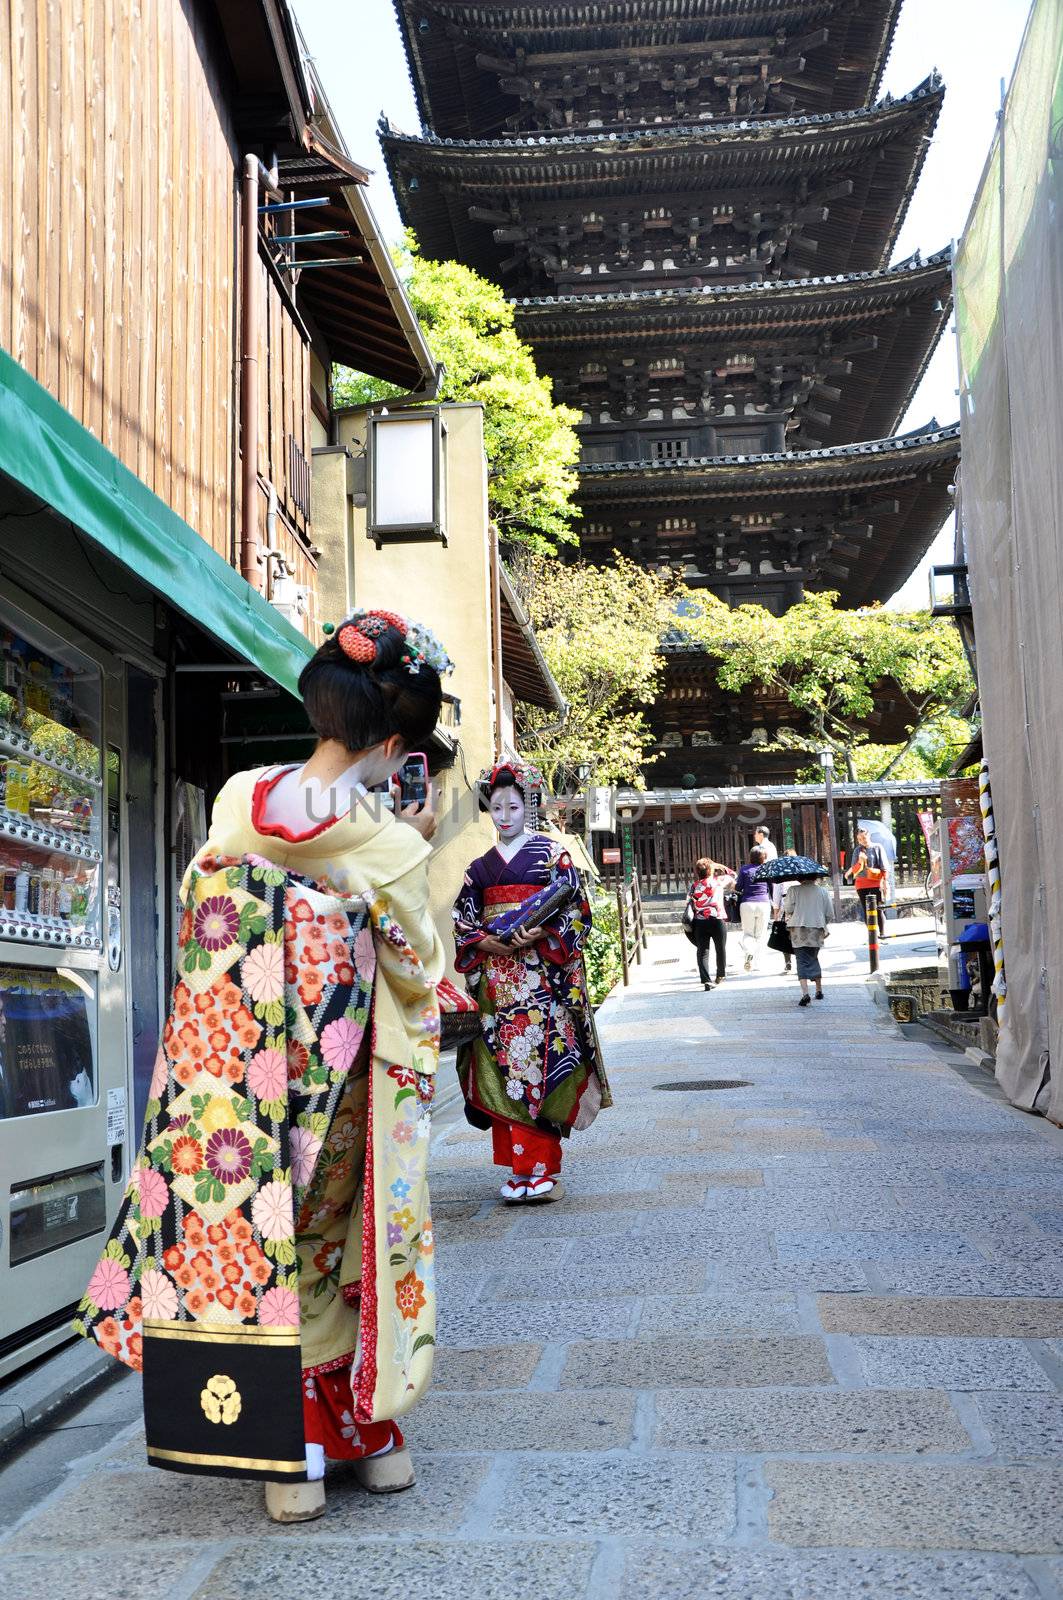 KYOTO, JAPAN - OCT 21 2012: Japanese ladies in traditional dress by siraanamwong